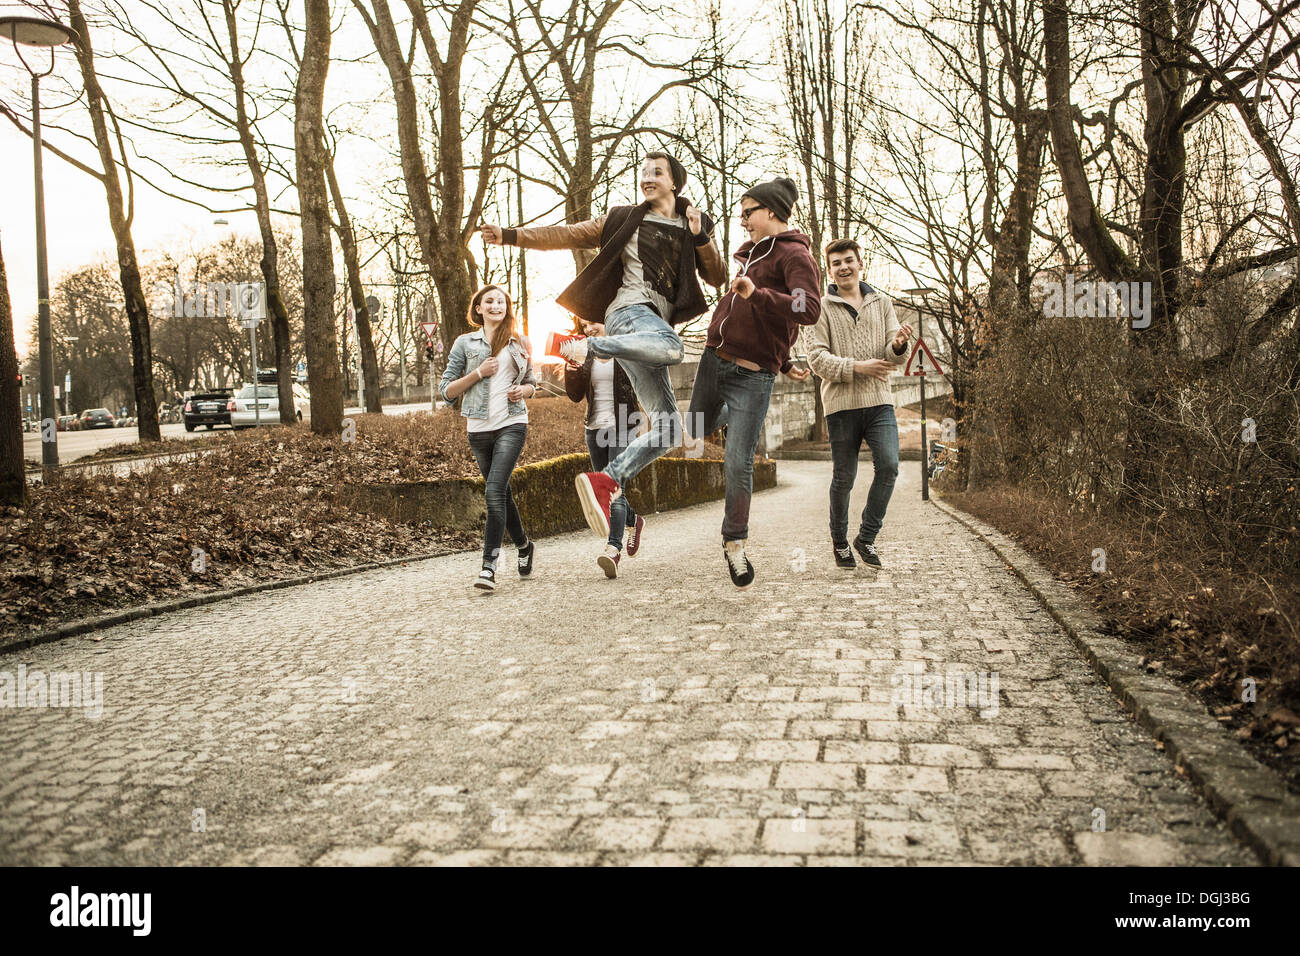 Five teenagers fooling around in park Stock Photo